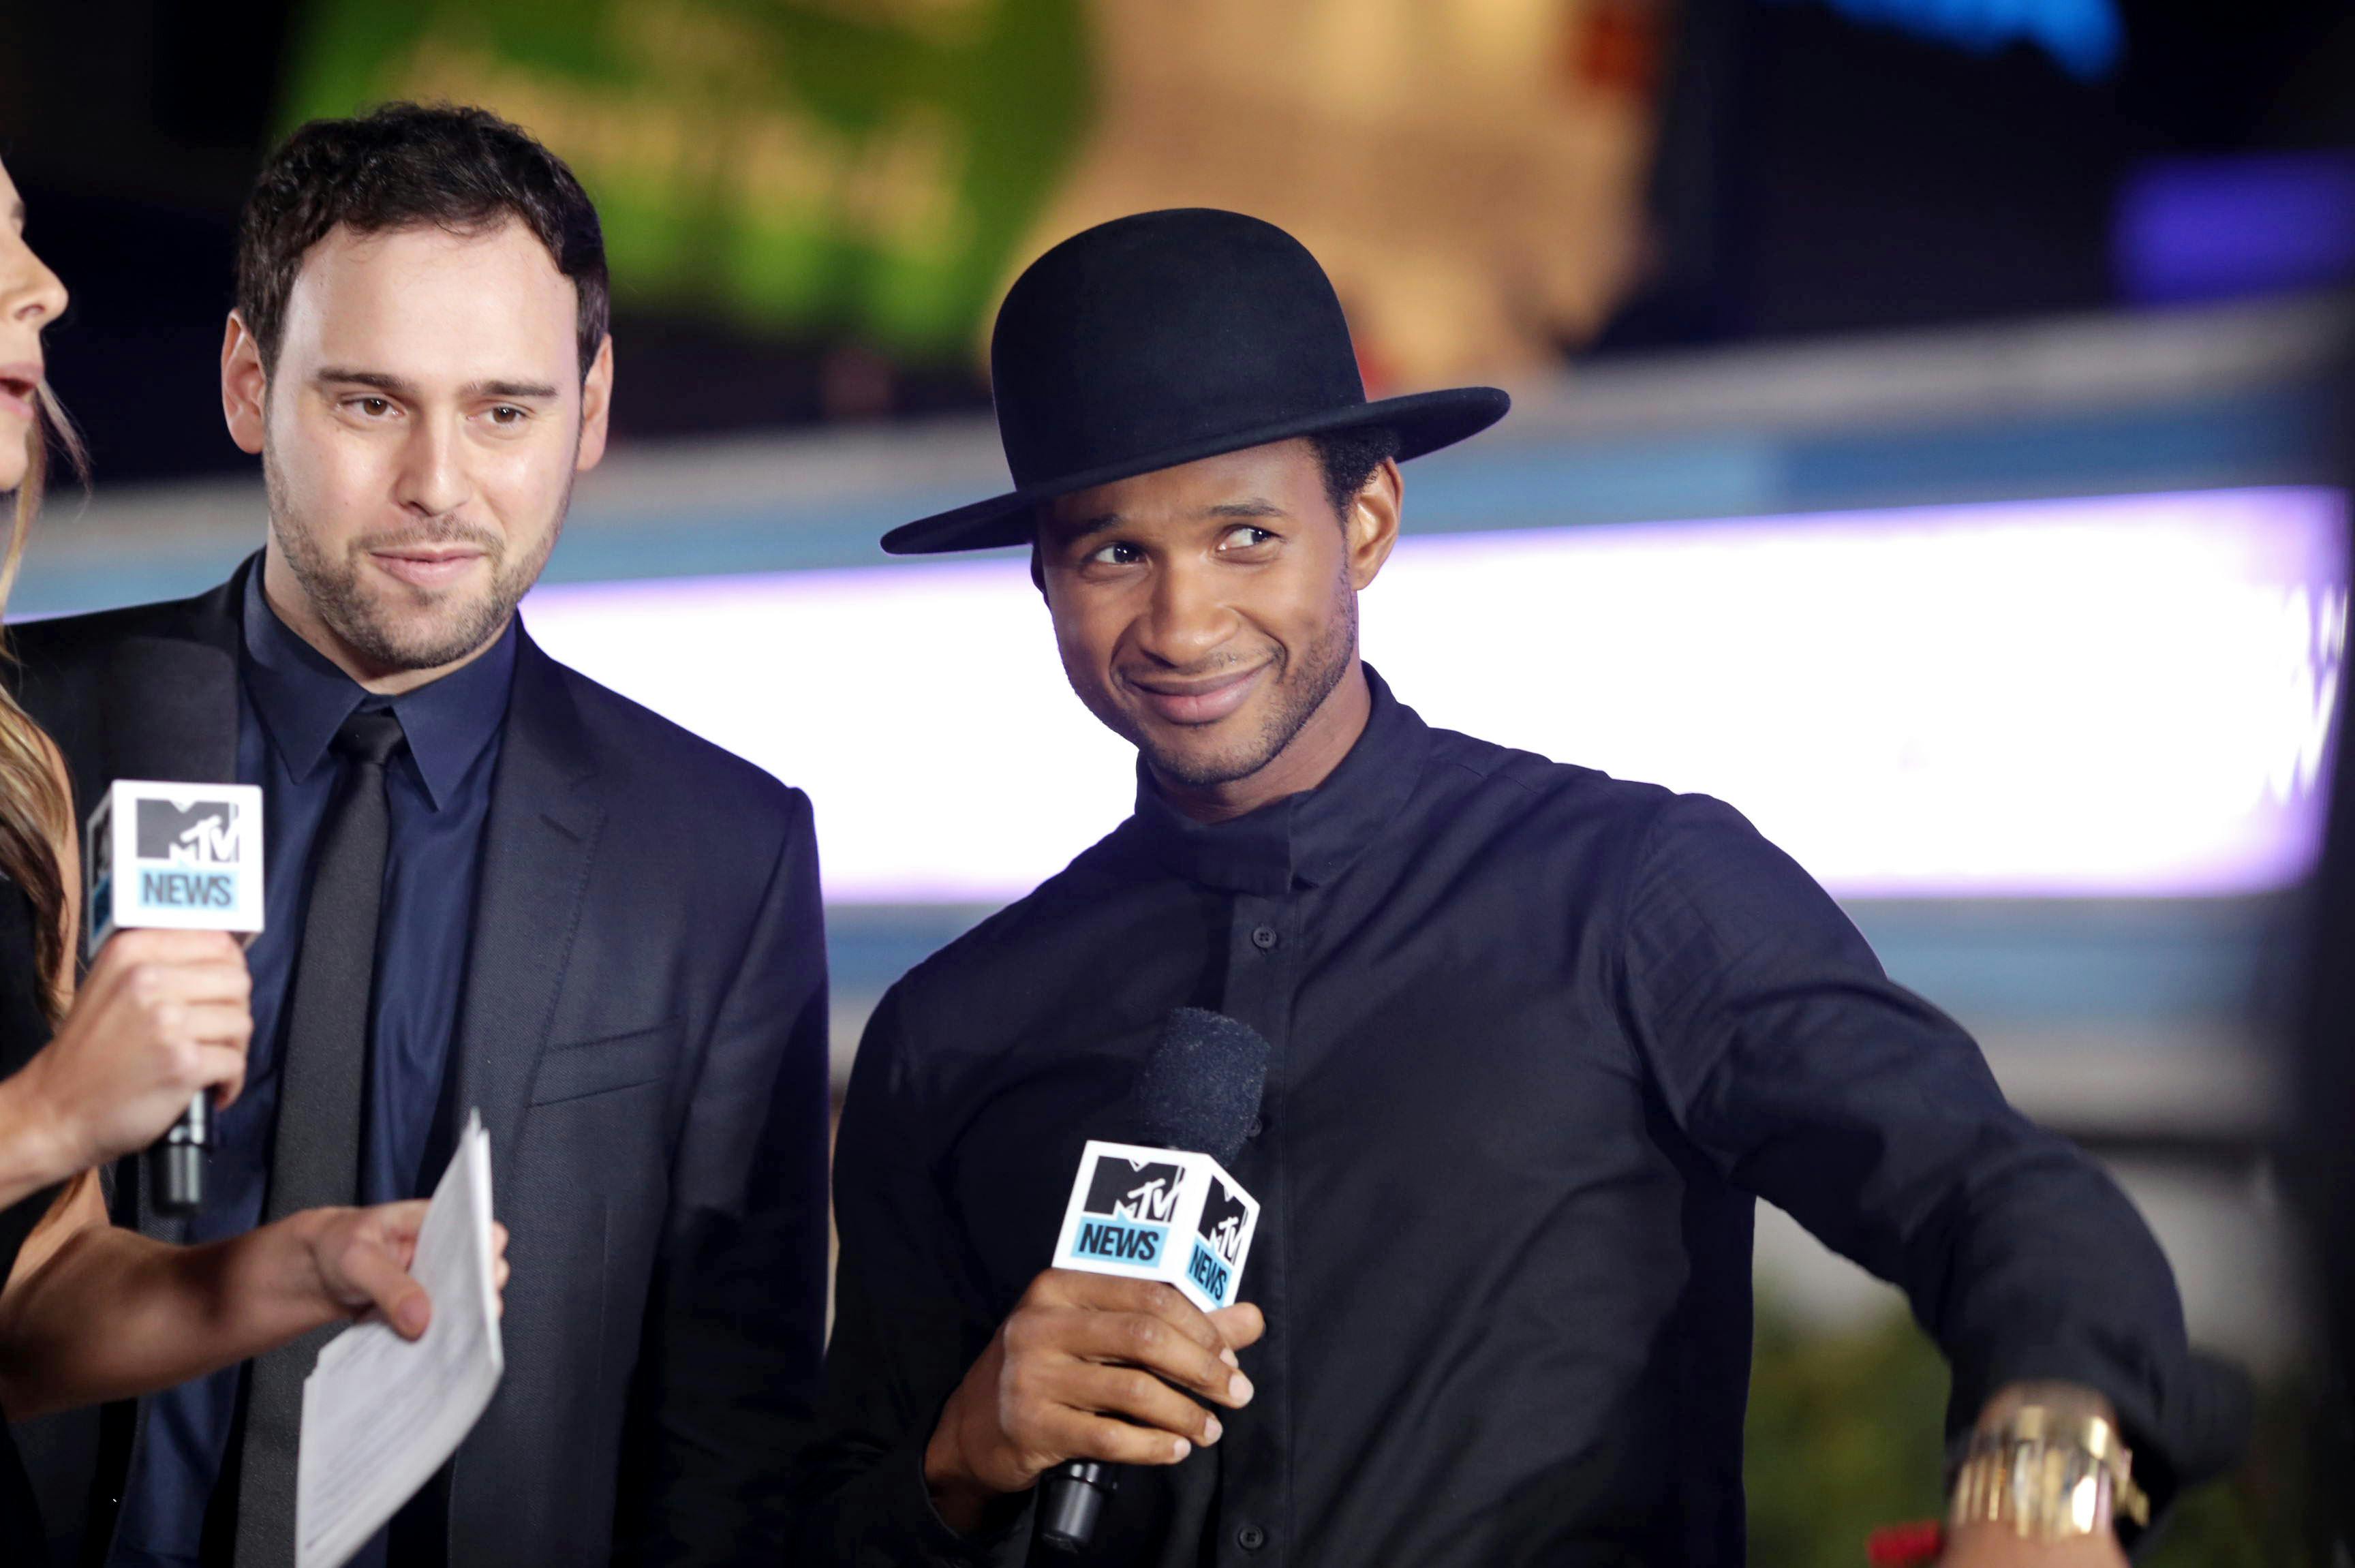 Producer Scooter Braun and Usher Raymond seen at the World Premiere of Open Road's "Justin Bieber's Believe" presented by Teen Vogue and sponsored by Clearasil, on Wednesday, Dec. 18, 2013 in Los Angeles. (Photo by Eric Charbonneau/Invision for Open Road Films/AP Images)